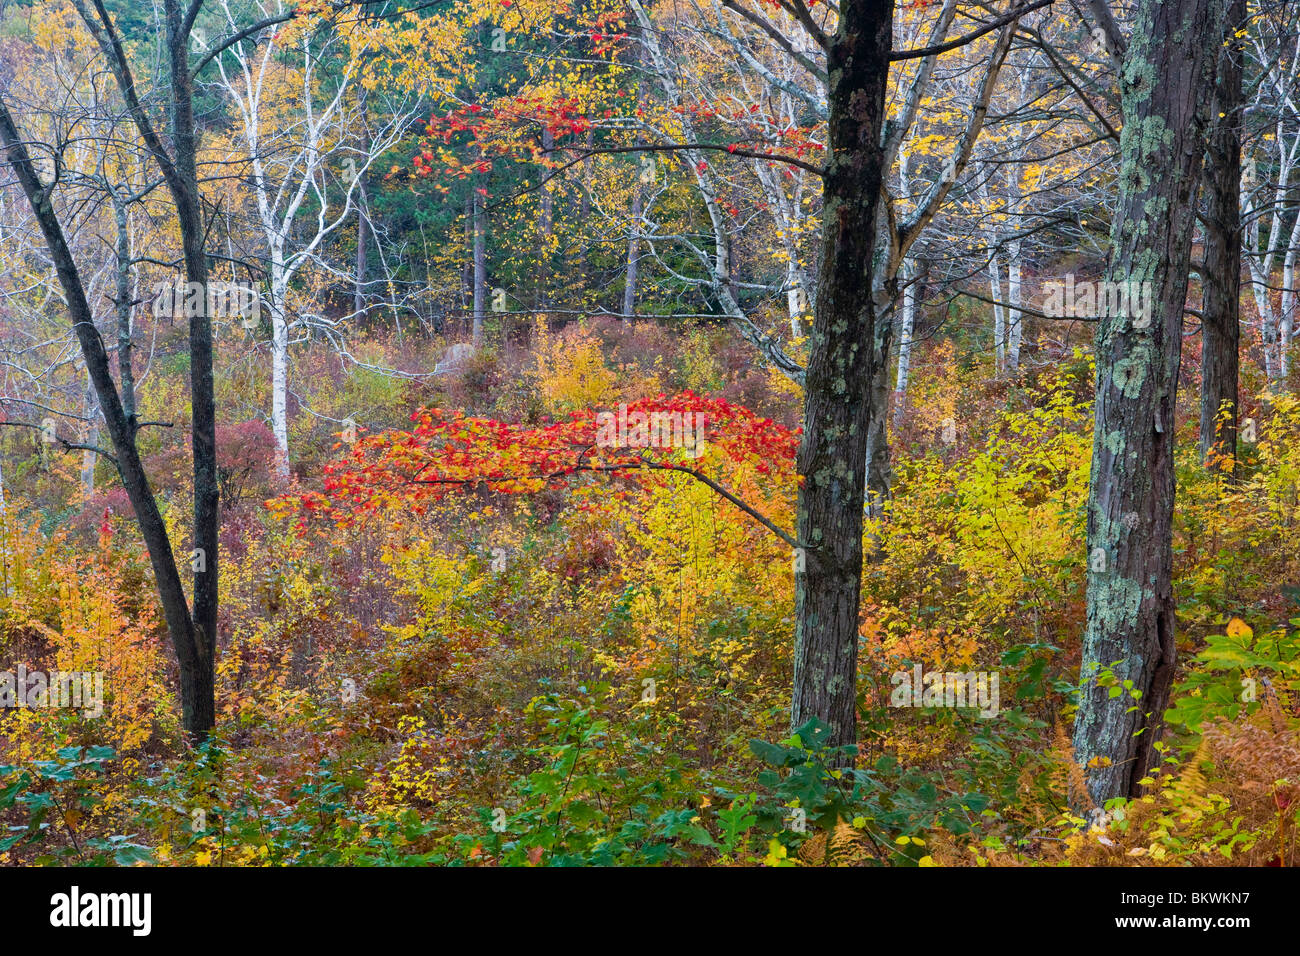 Fall colors in the forest in the Quabbin Reservoir Reservation in Ware, Massachusetts. Stock Photo